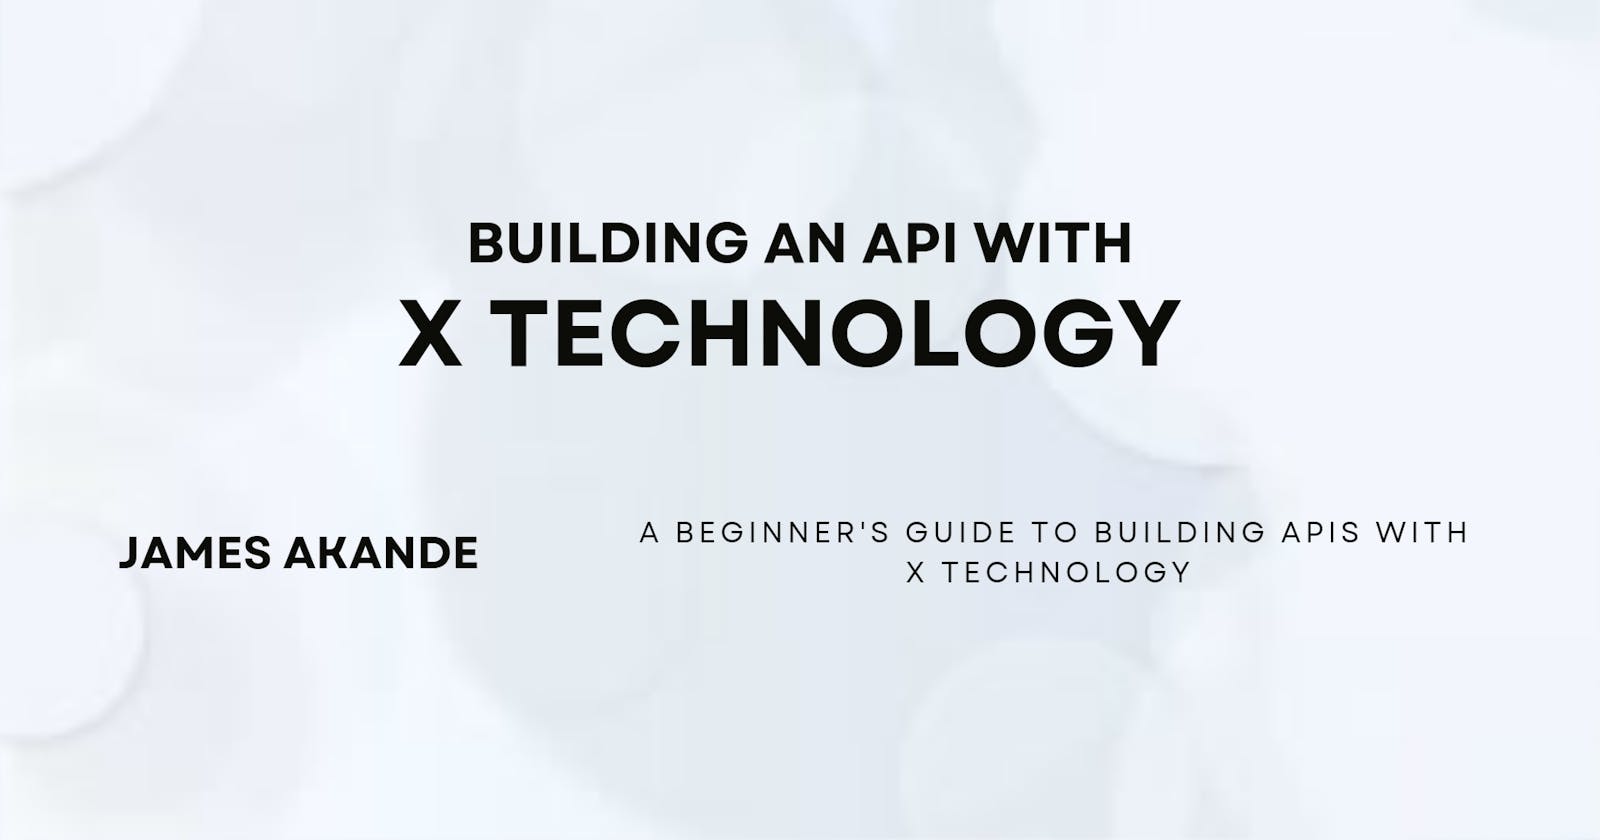 Building Your First API with X